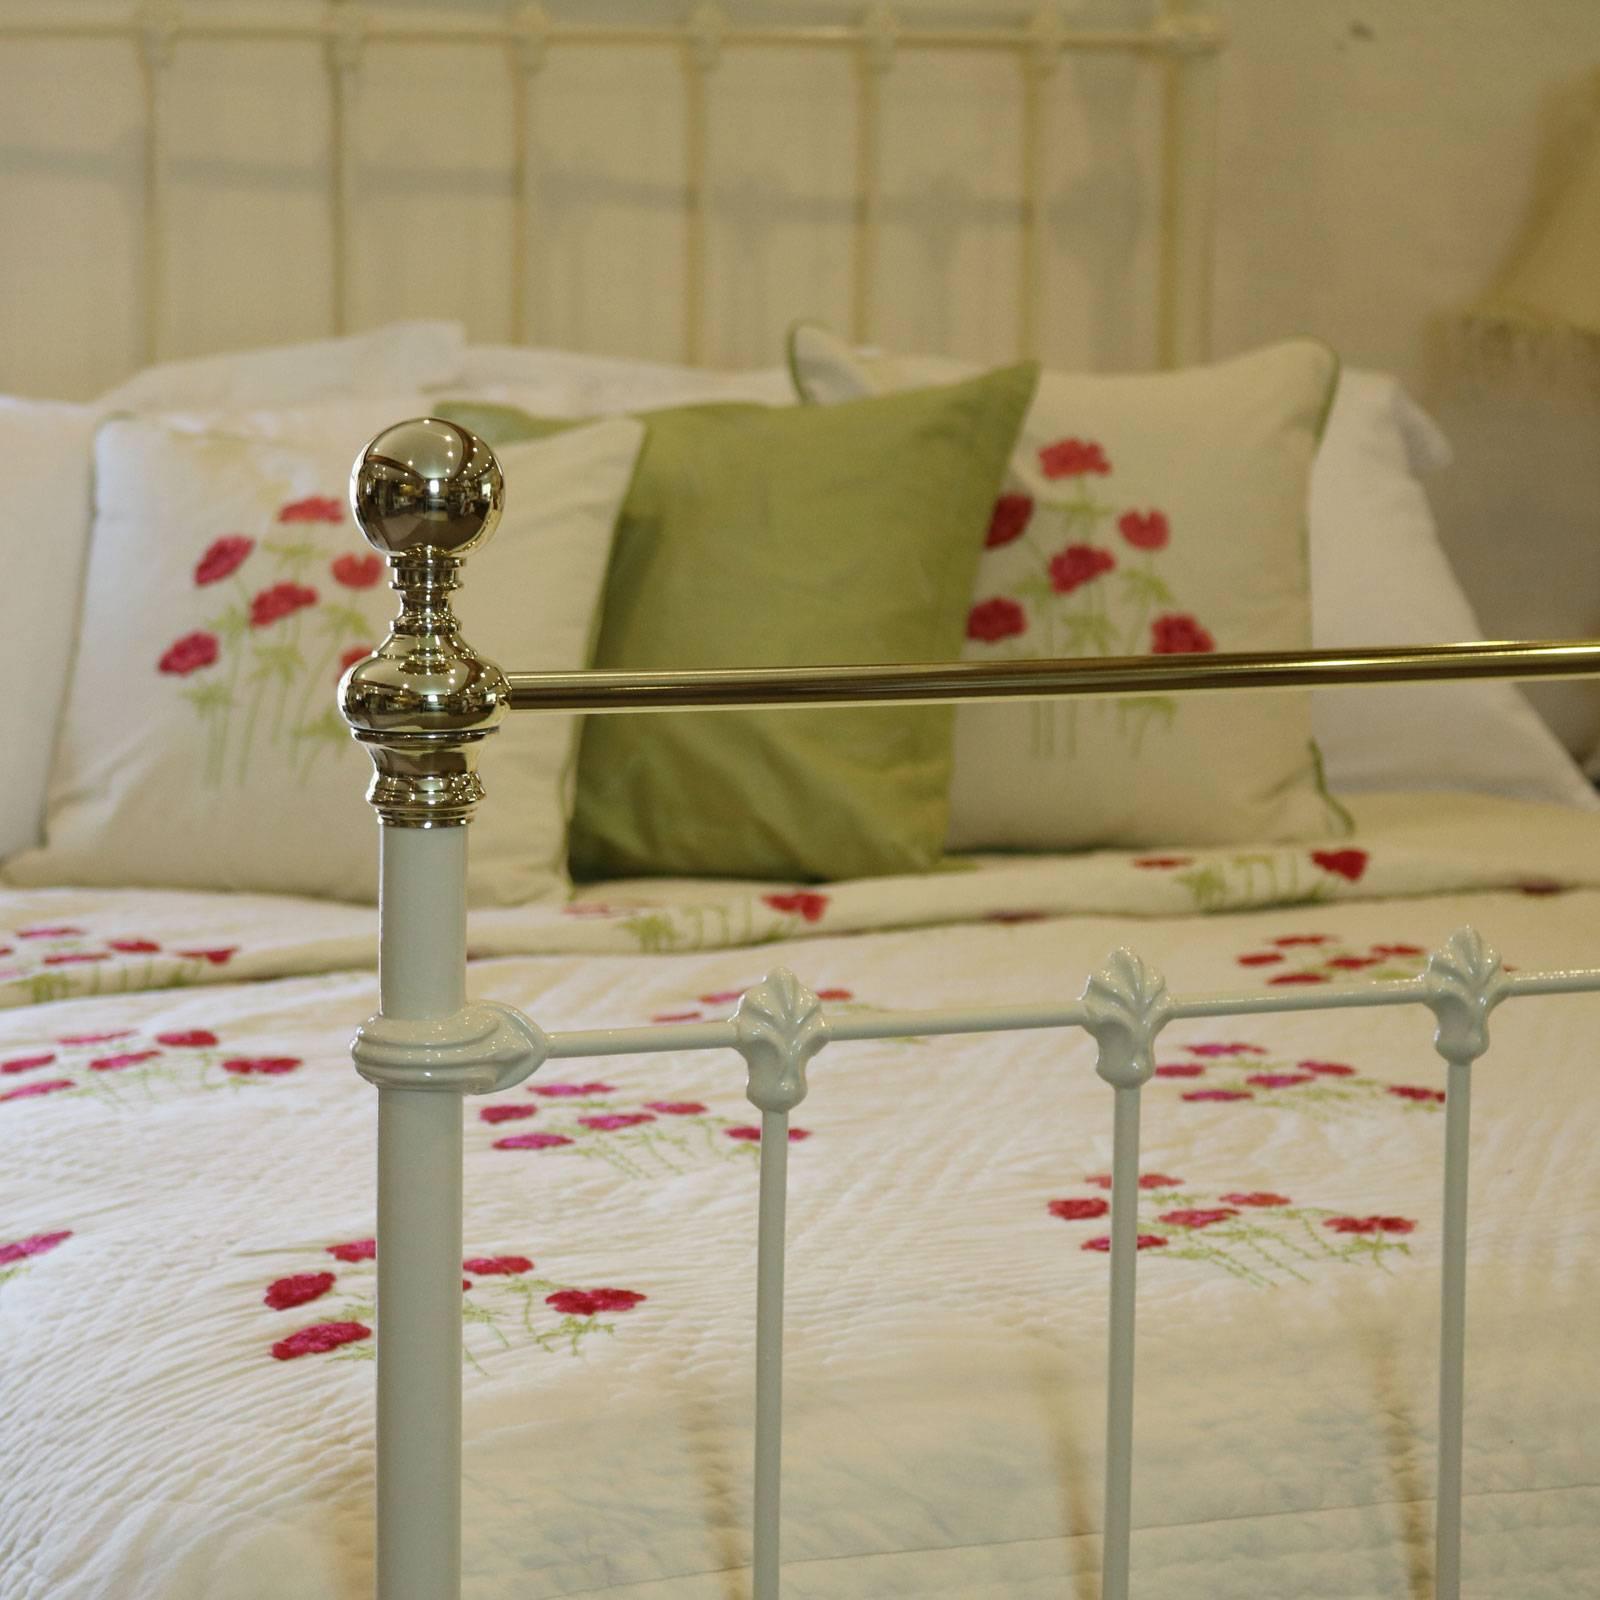 Victorian Brass and Iron Bed in Cream, MK78